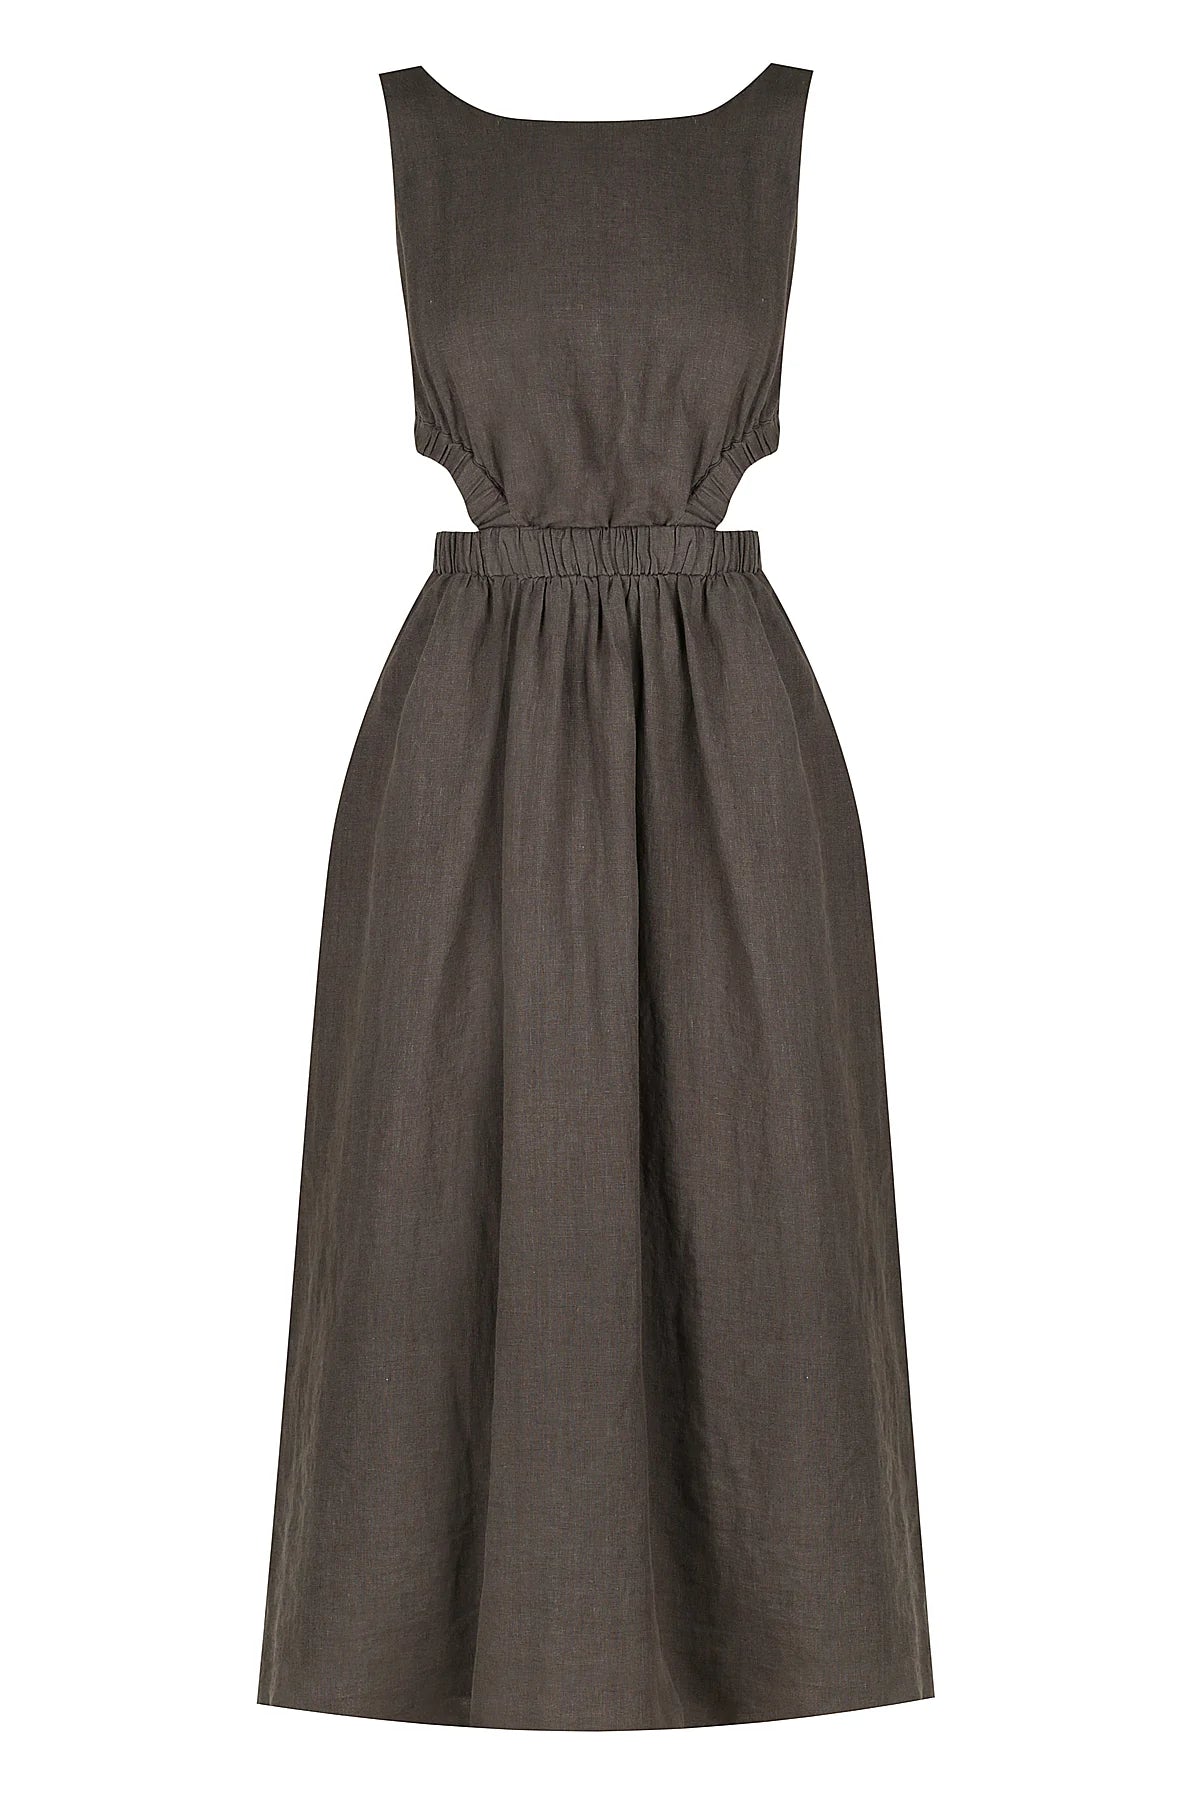 Charcoal linen midi dress with high neck and elasticated cut out features with a cross back